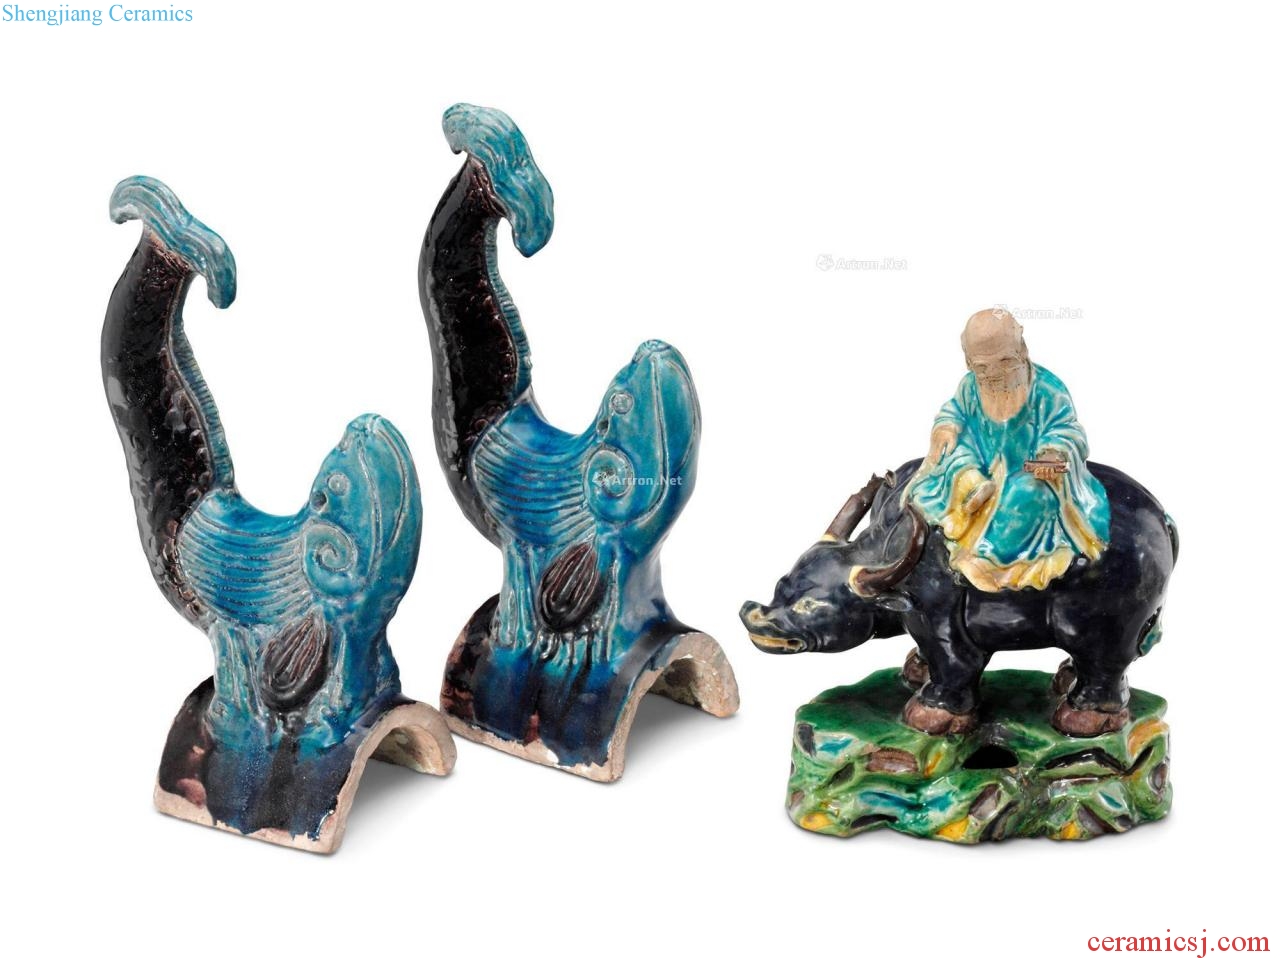 Ming or after Fish type tile pair and Lao tze like a statue